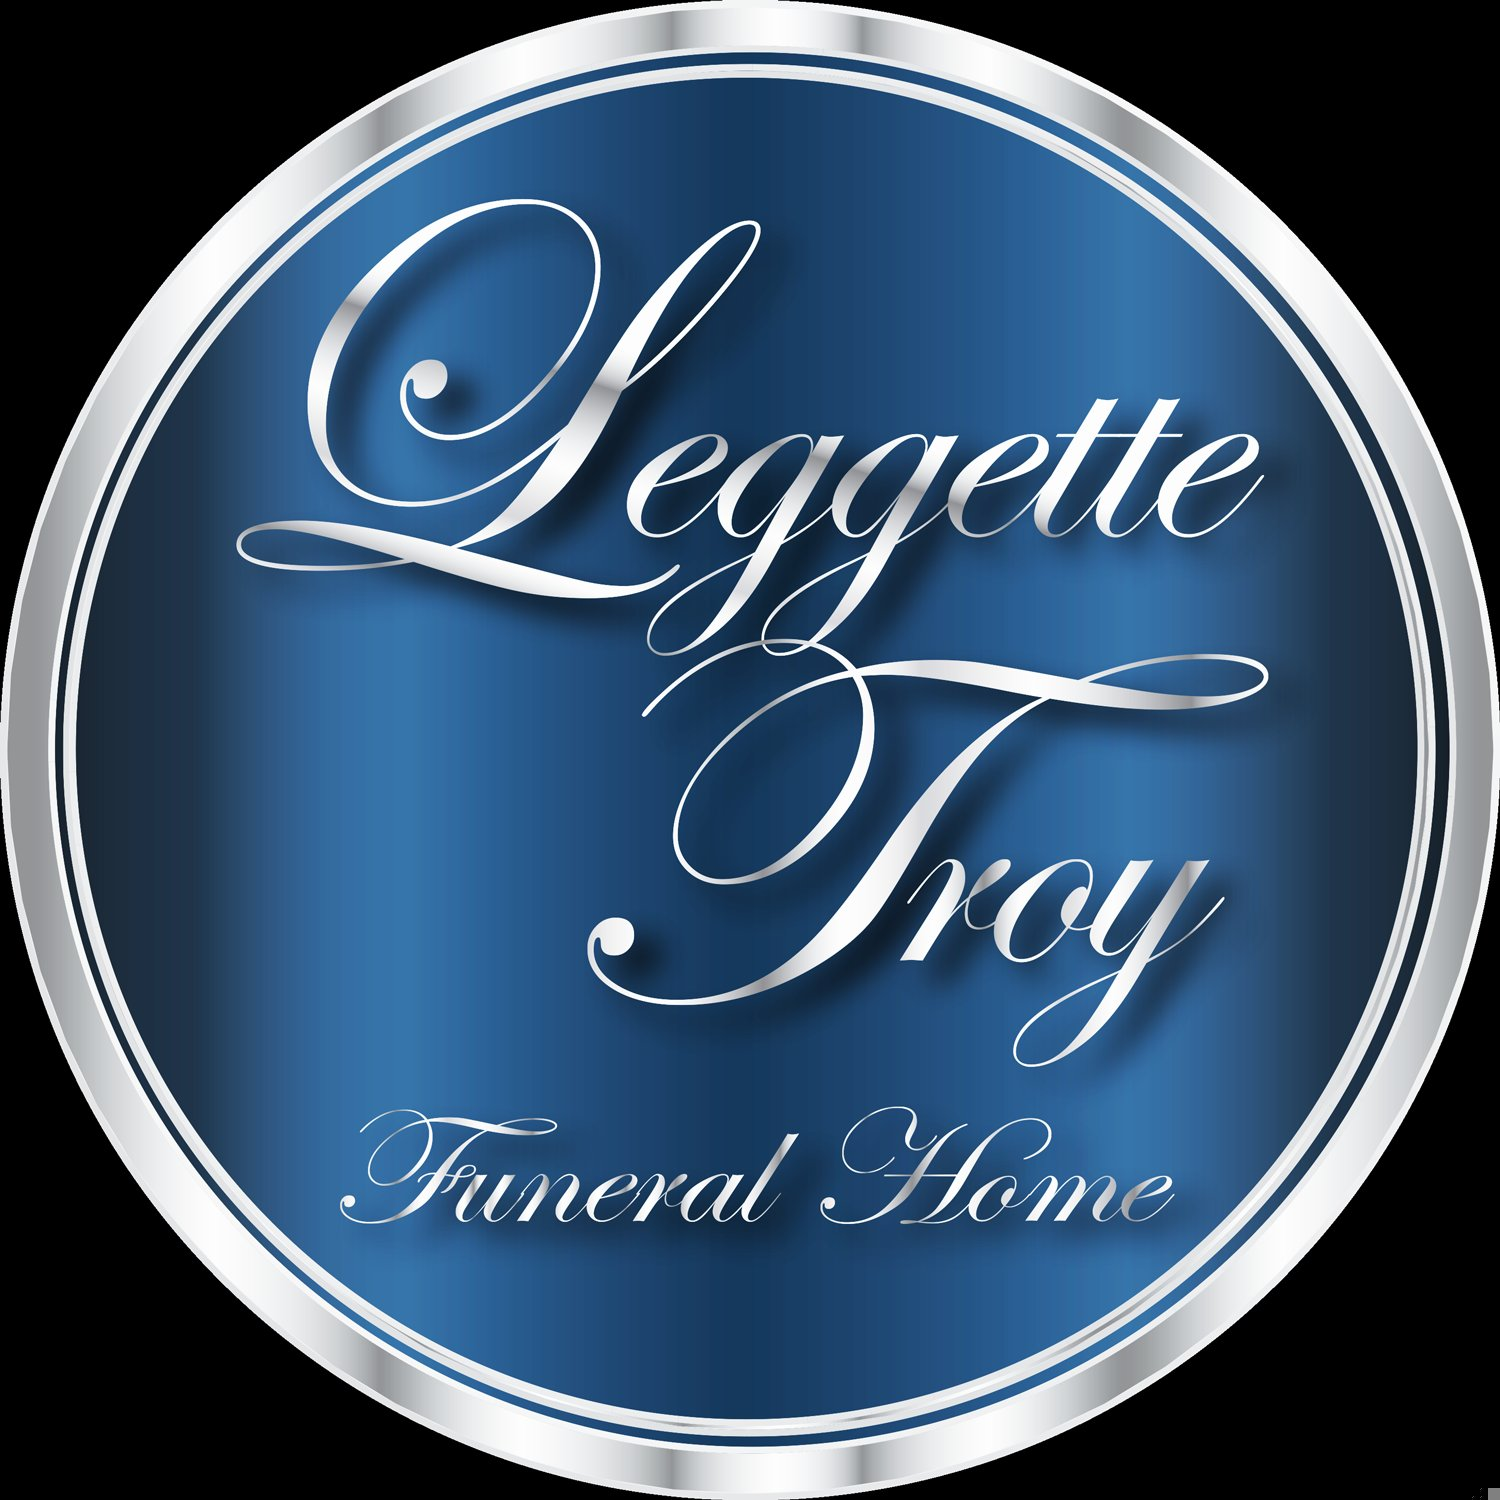 Leggette-Troy Funeral Home: Honoring Lives With Dignity